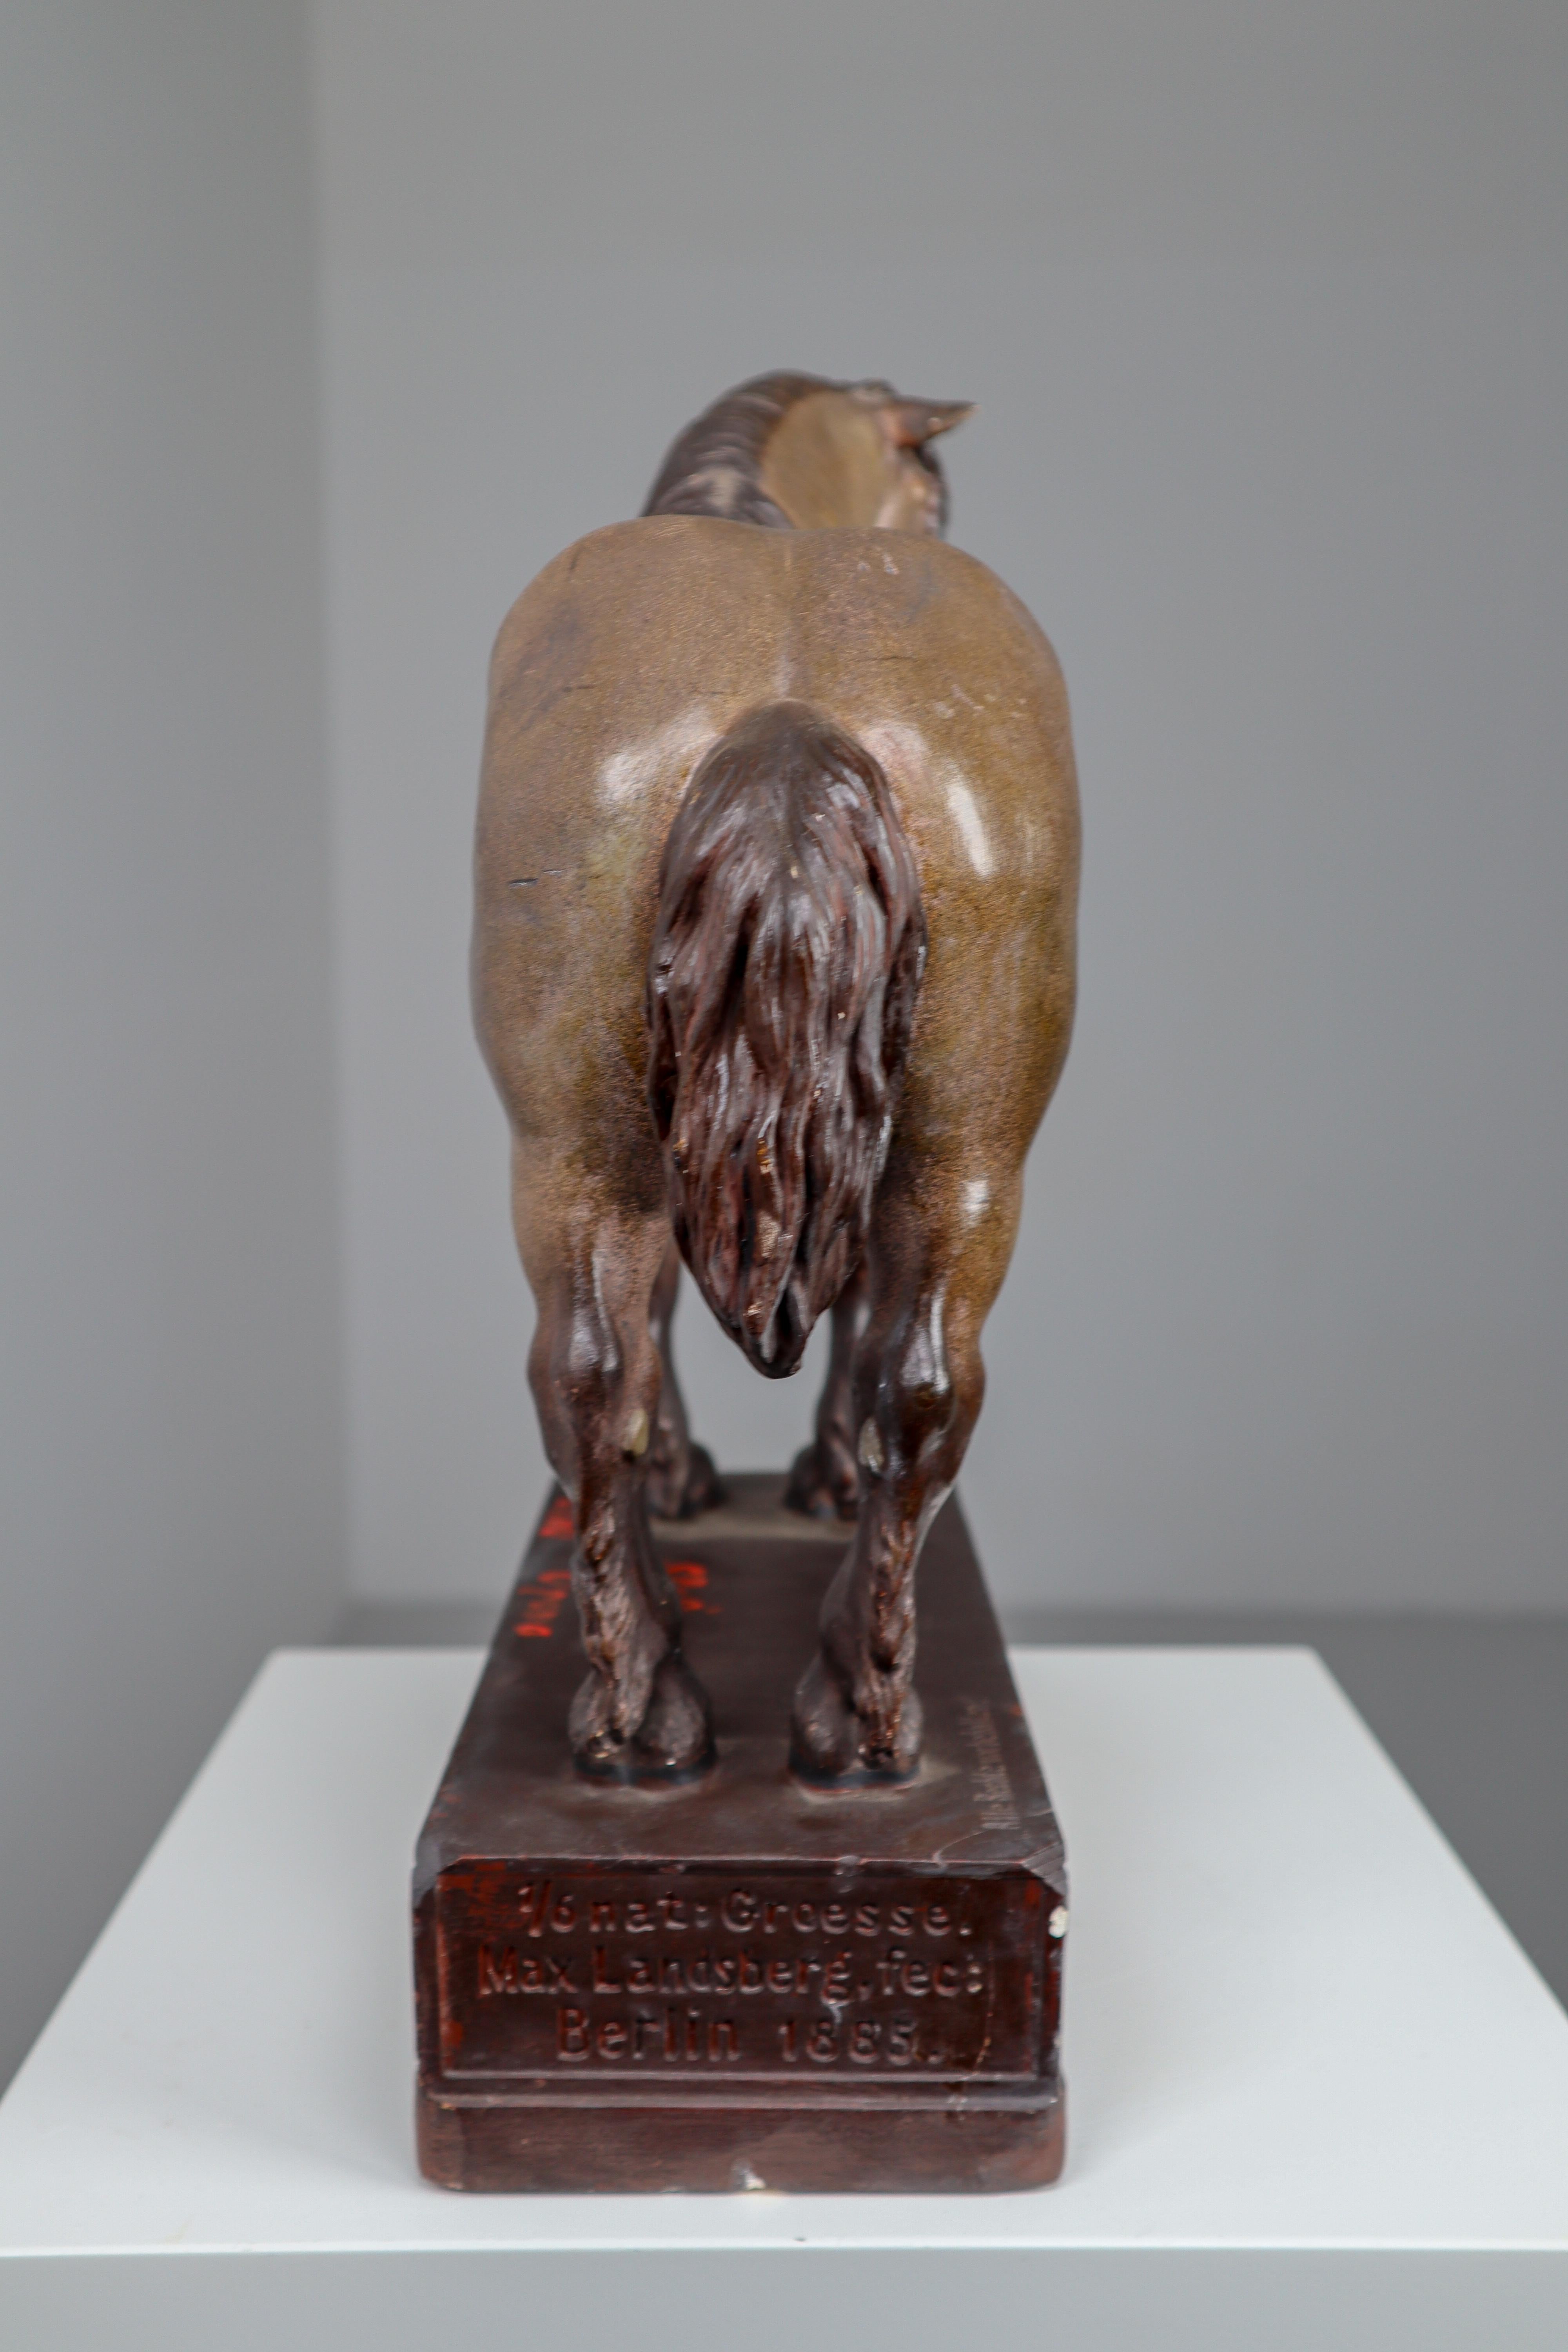 Cold Blood Horse Model in Painted Plaster by Max Landsberg, Berlin 1885 4